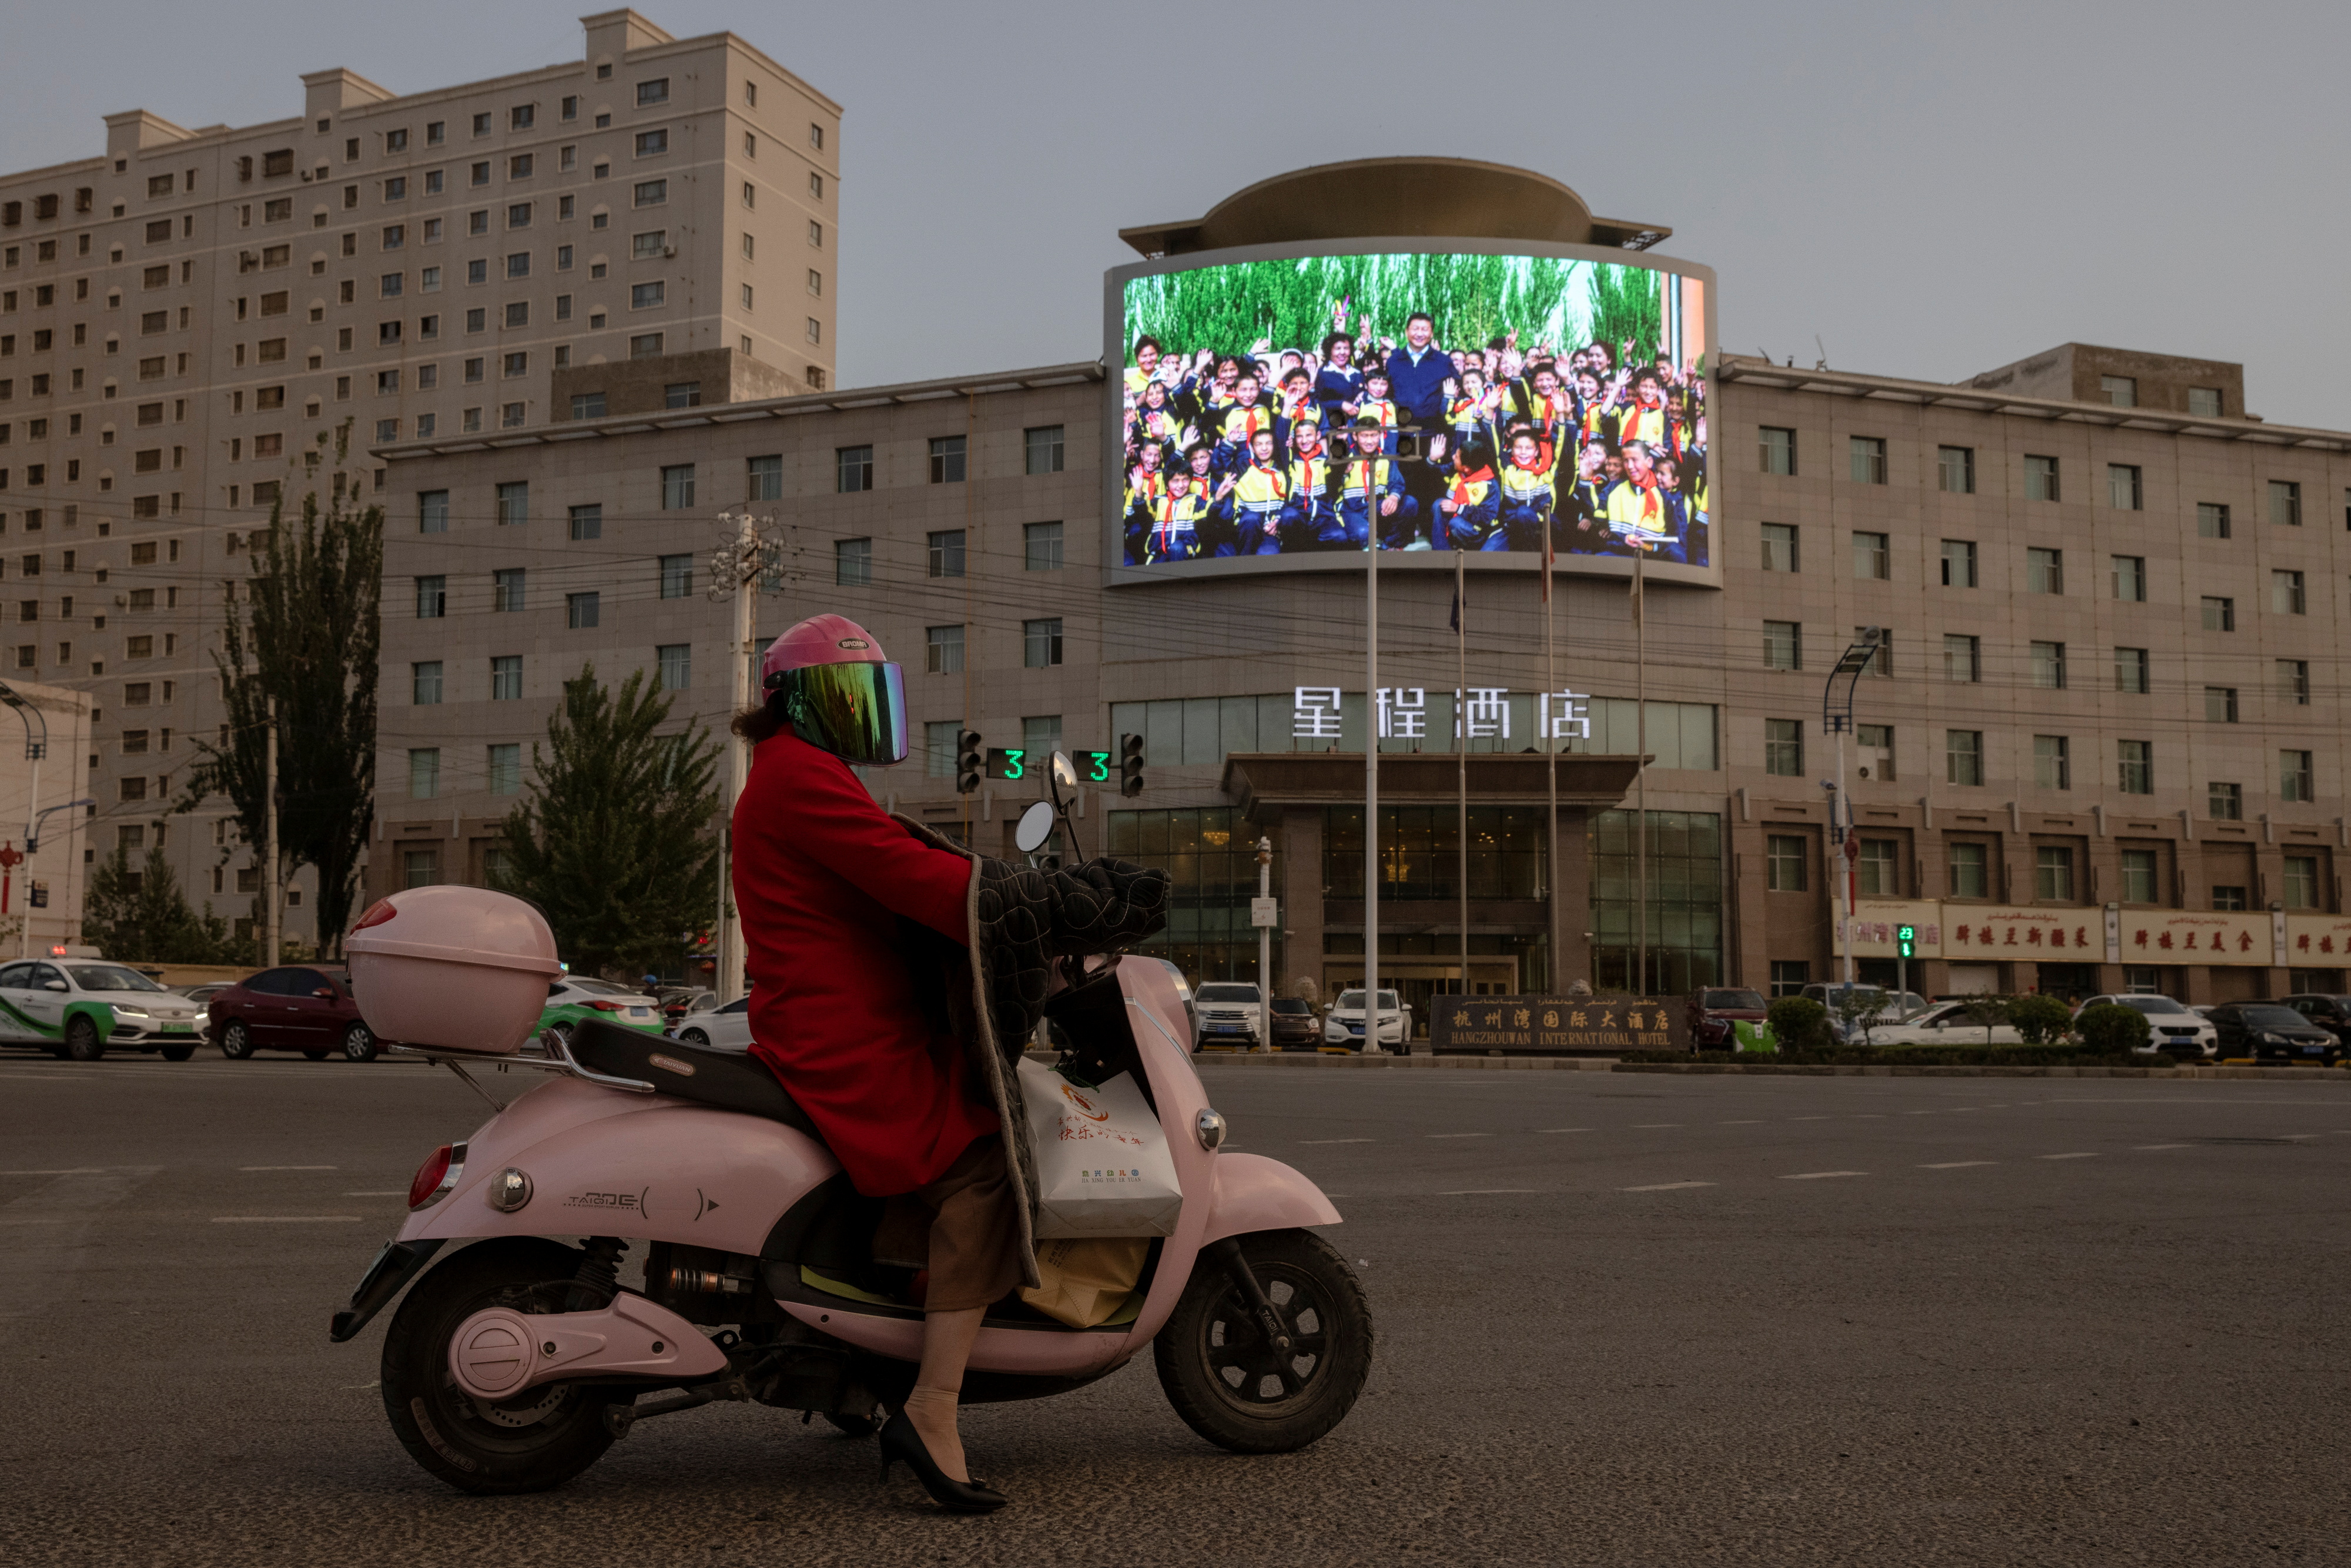 A screen shows a picture of Chinese President Xi Jinping at a traffic junction in Hotan, Xinjiang Uyghur Autonomous Region